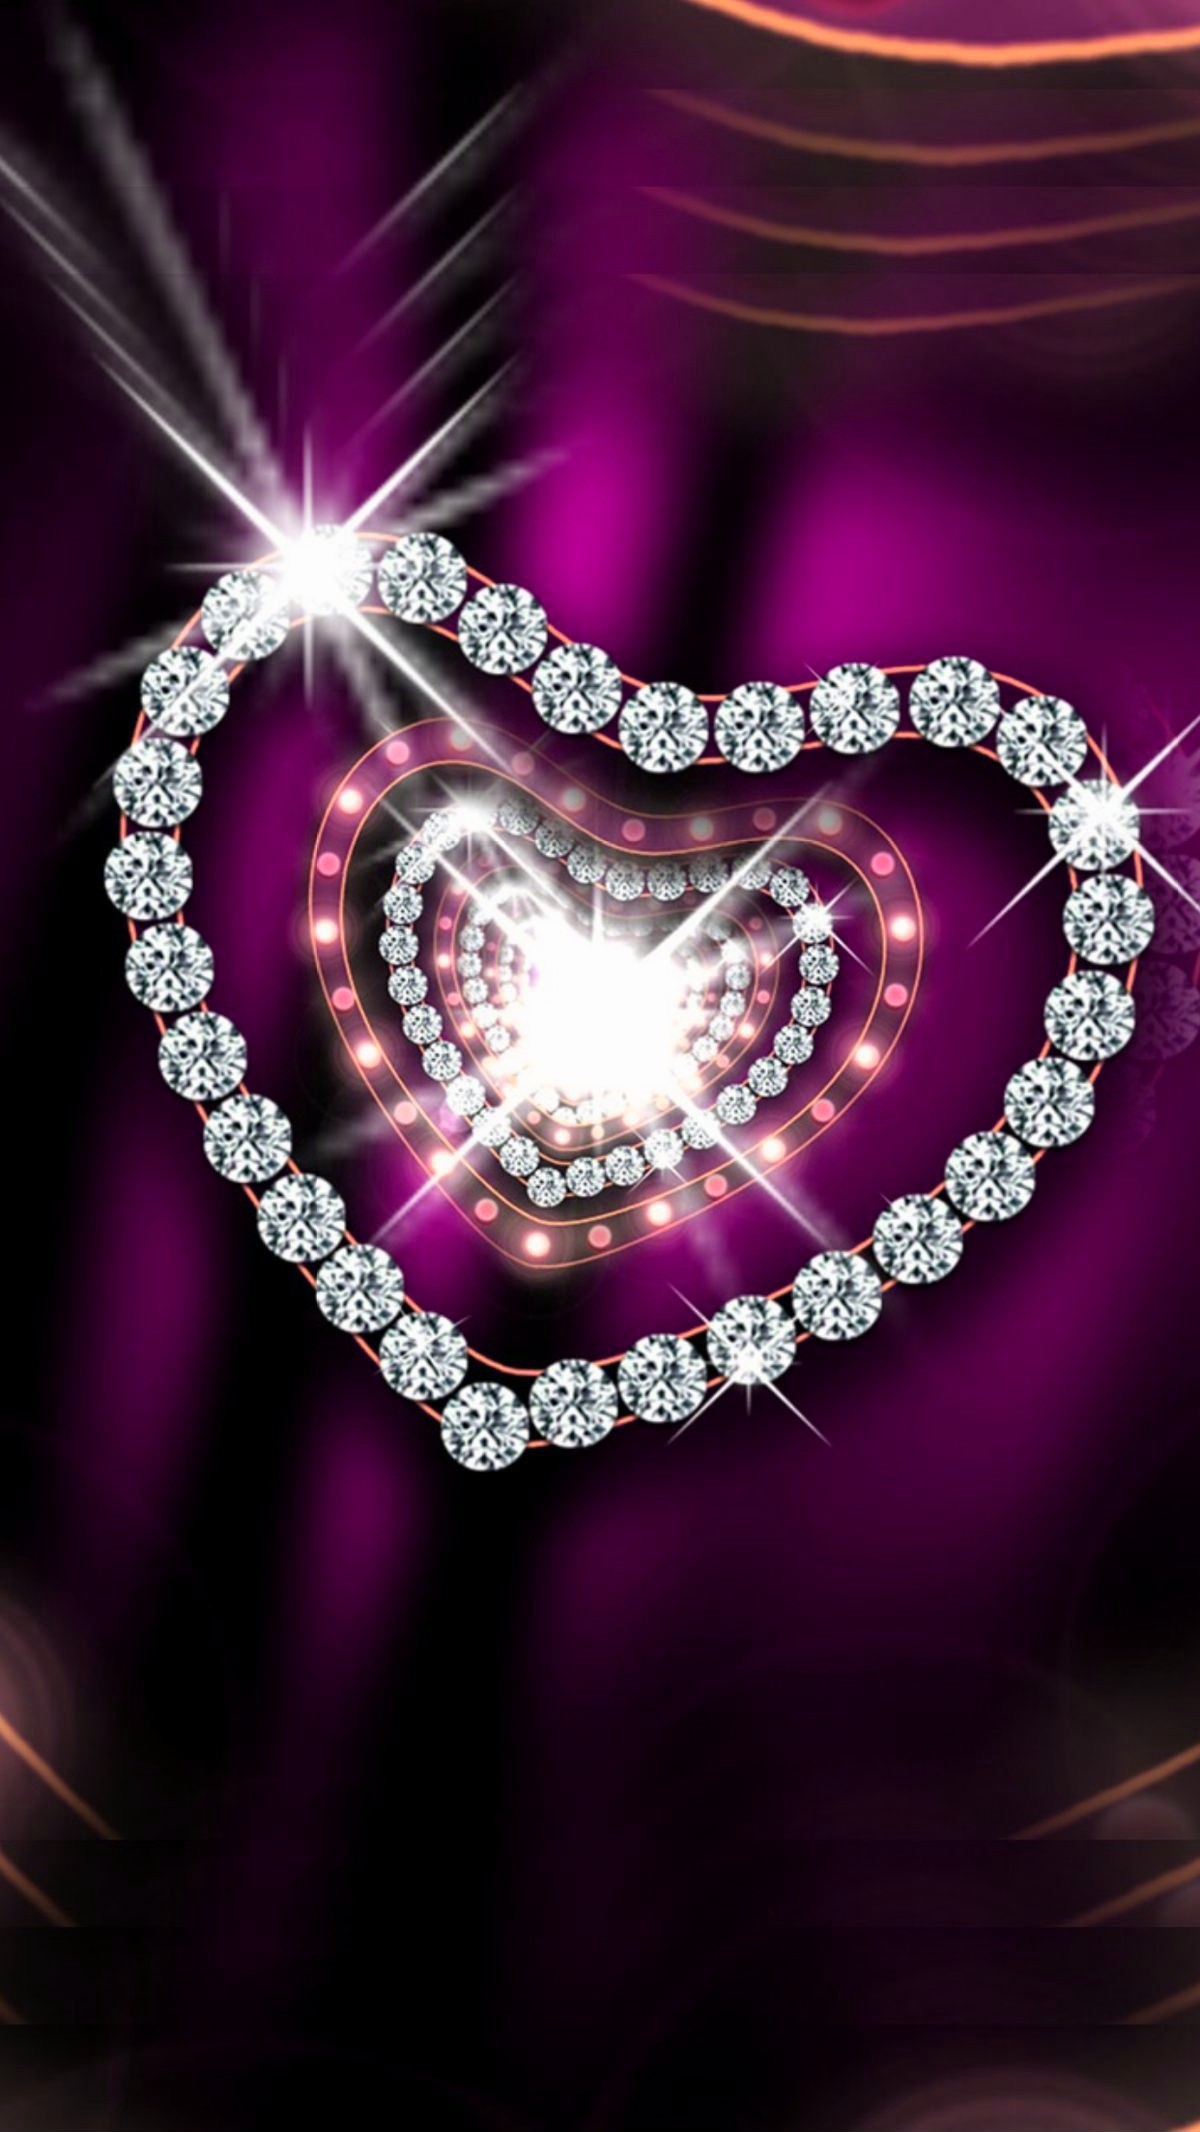 1200x2132 Purple and silver diamonds. Iphone BackgroundsWallpaper ...